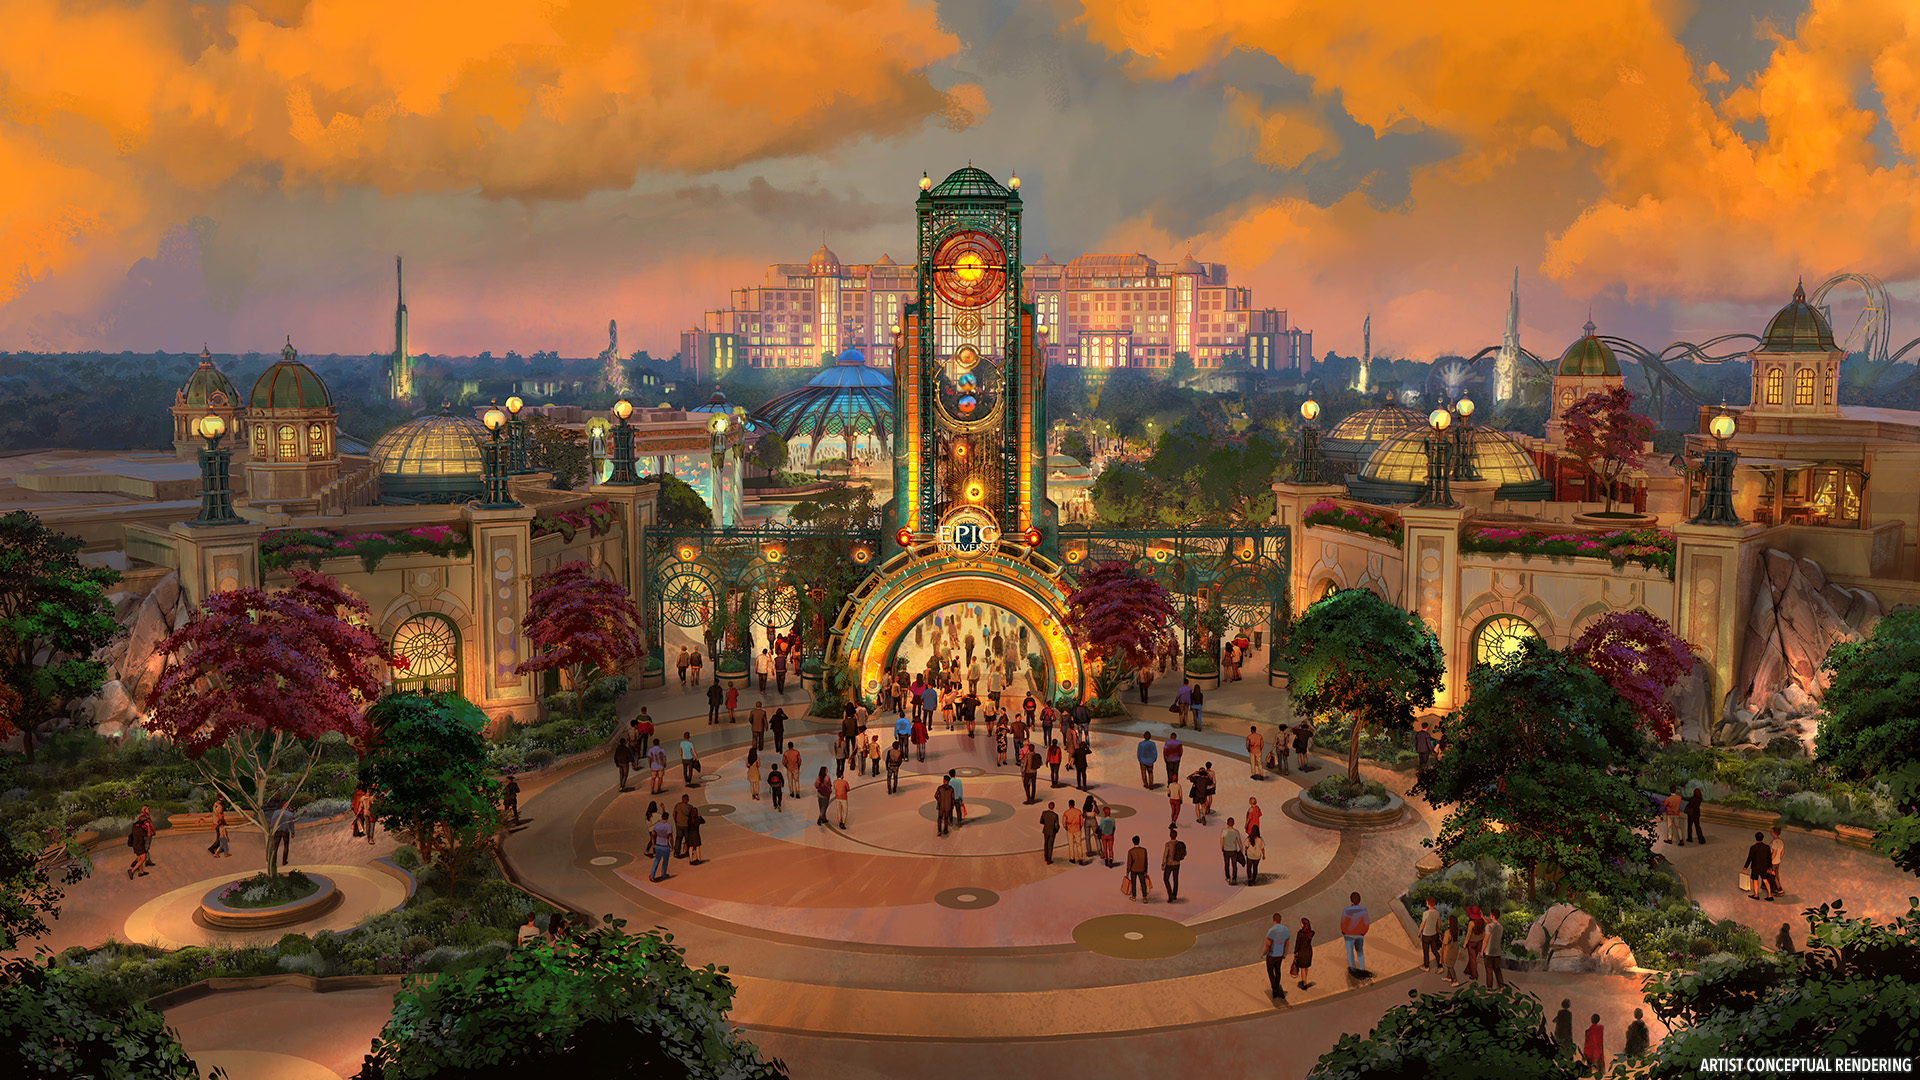 When Does Epic Universe At Universal Orlando Open?